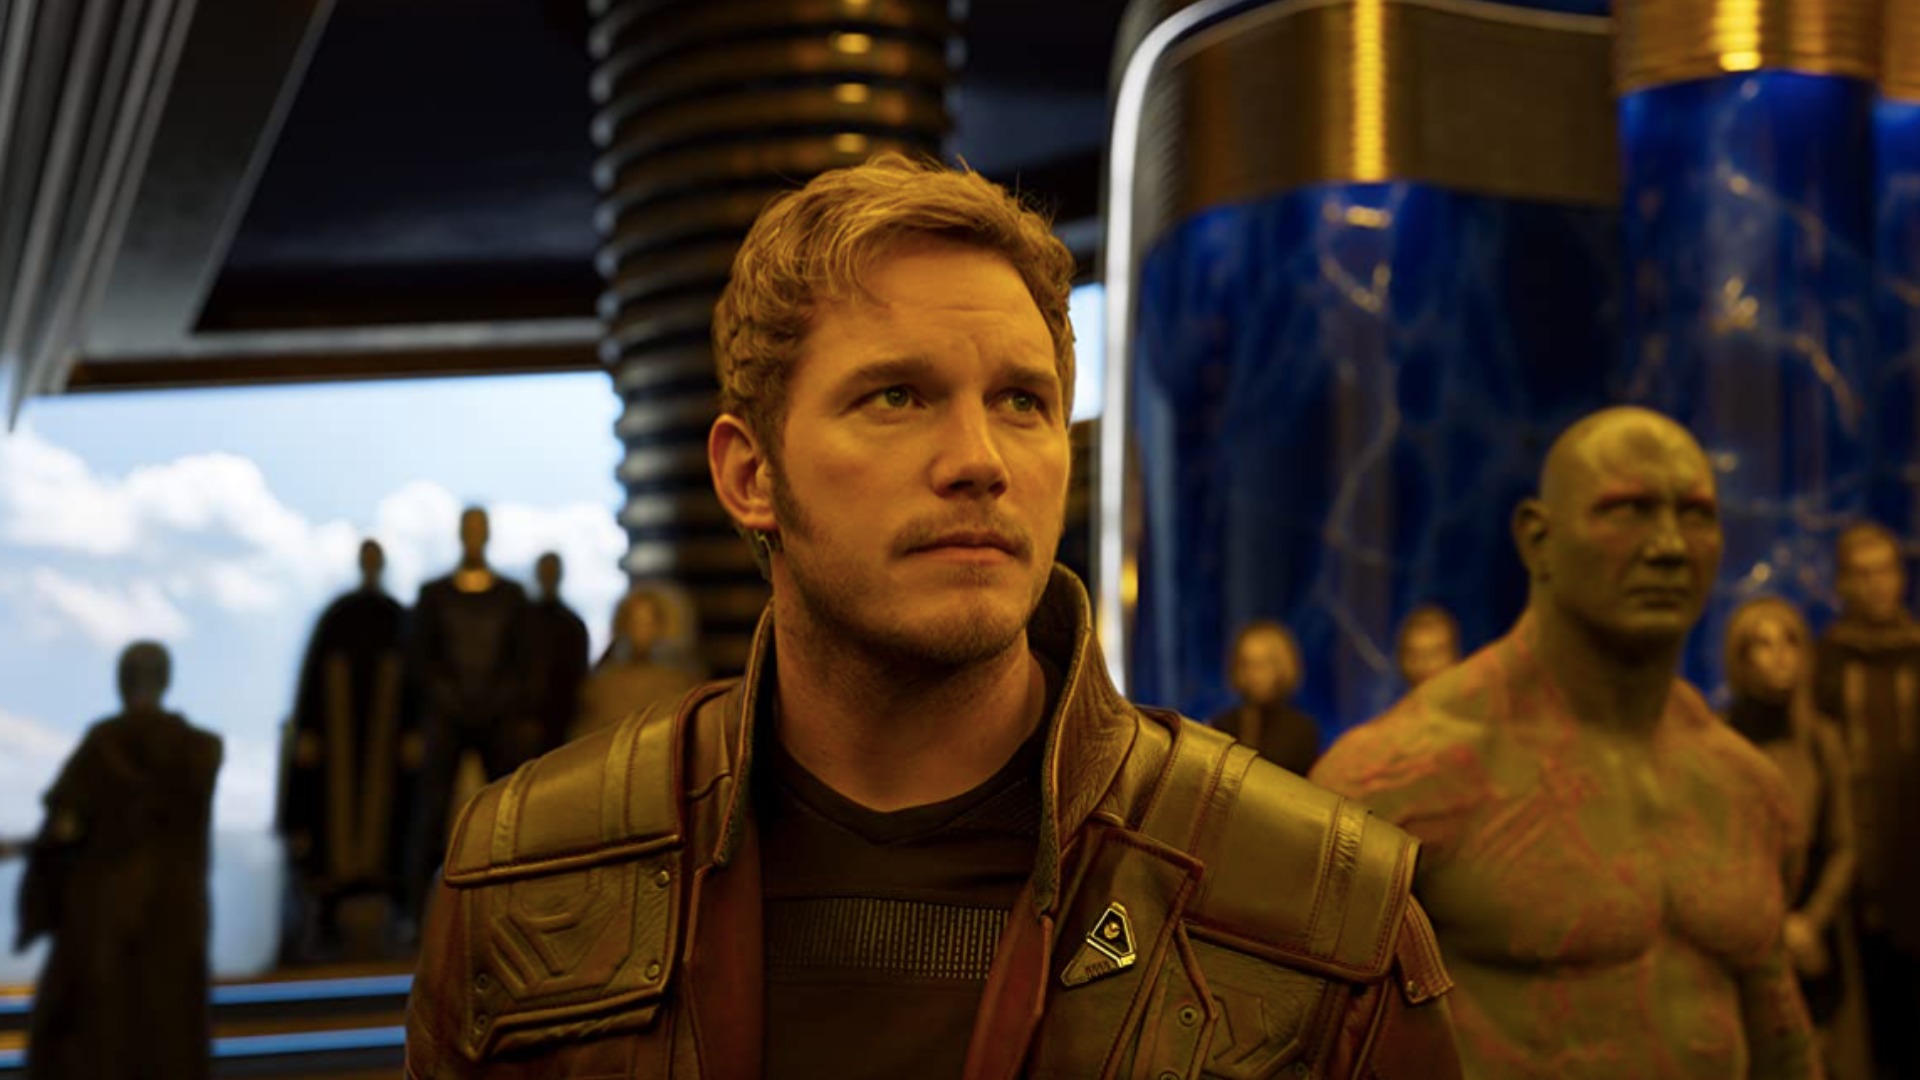 Guardians of the Galaxy 3 set photos might confirm new location in the MCU